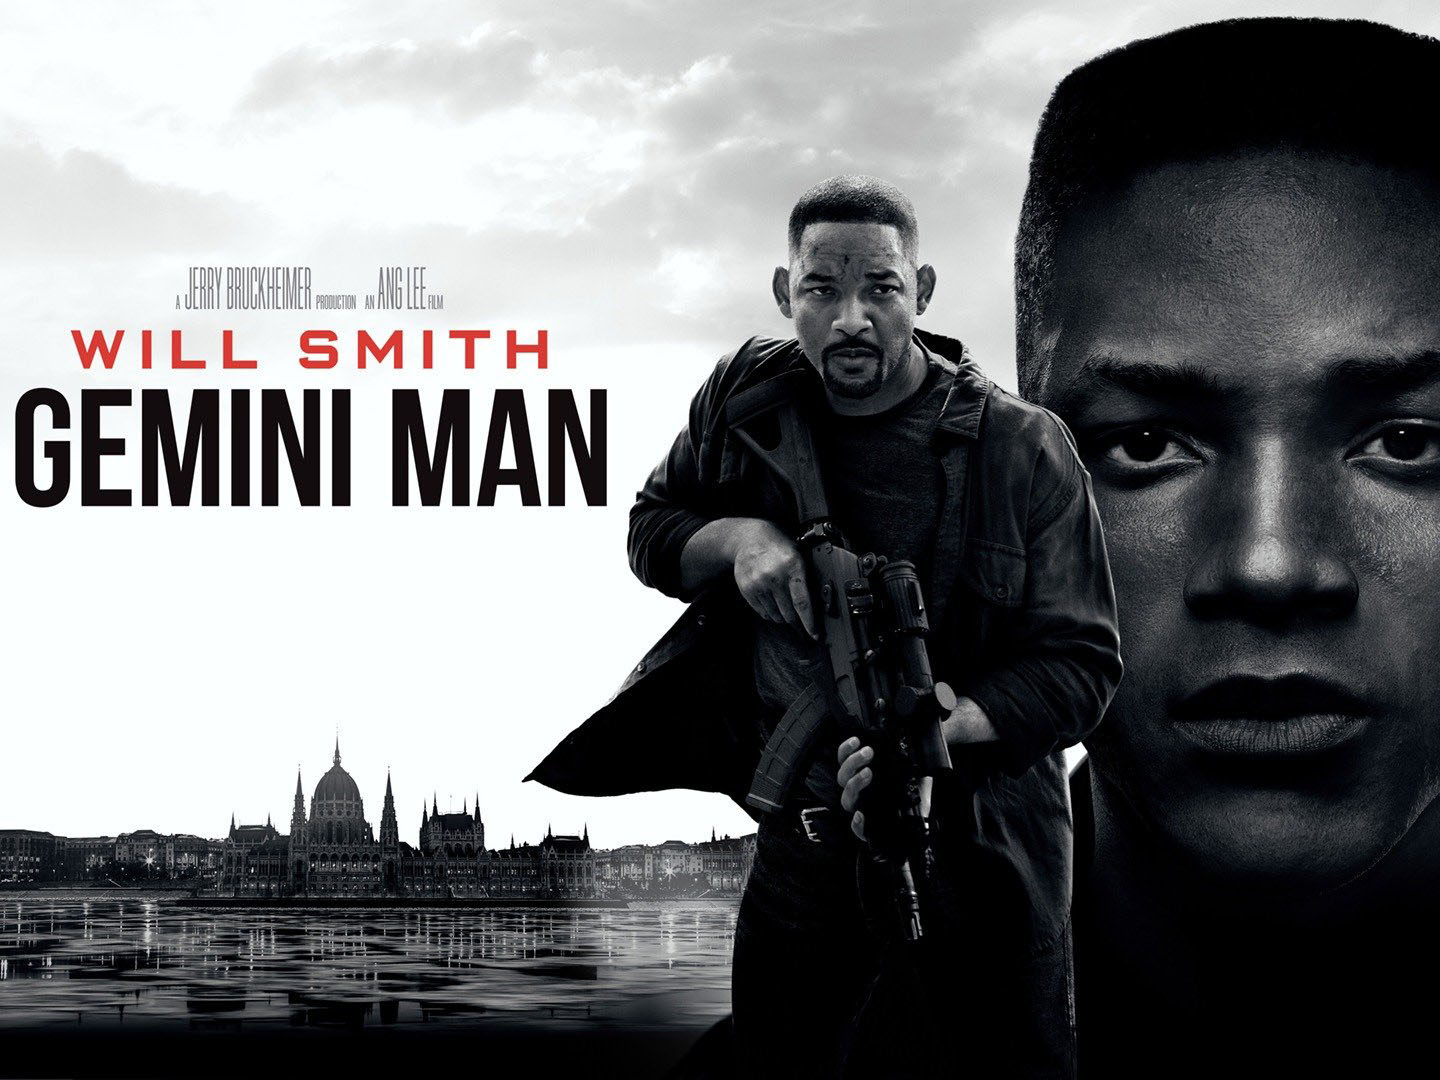 Gemini Man is an action-thriller movie starring Will Smith 